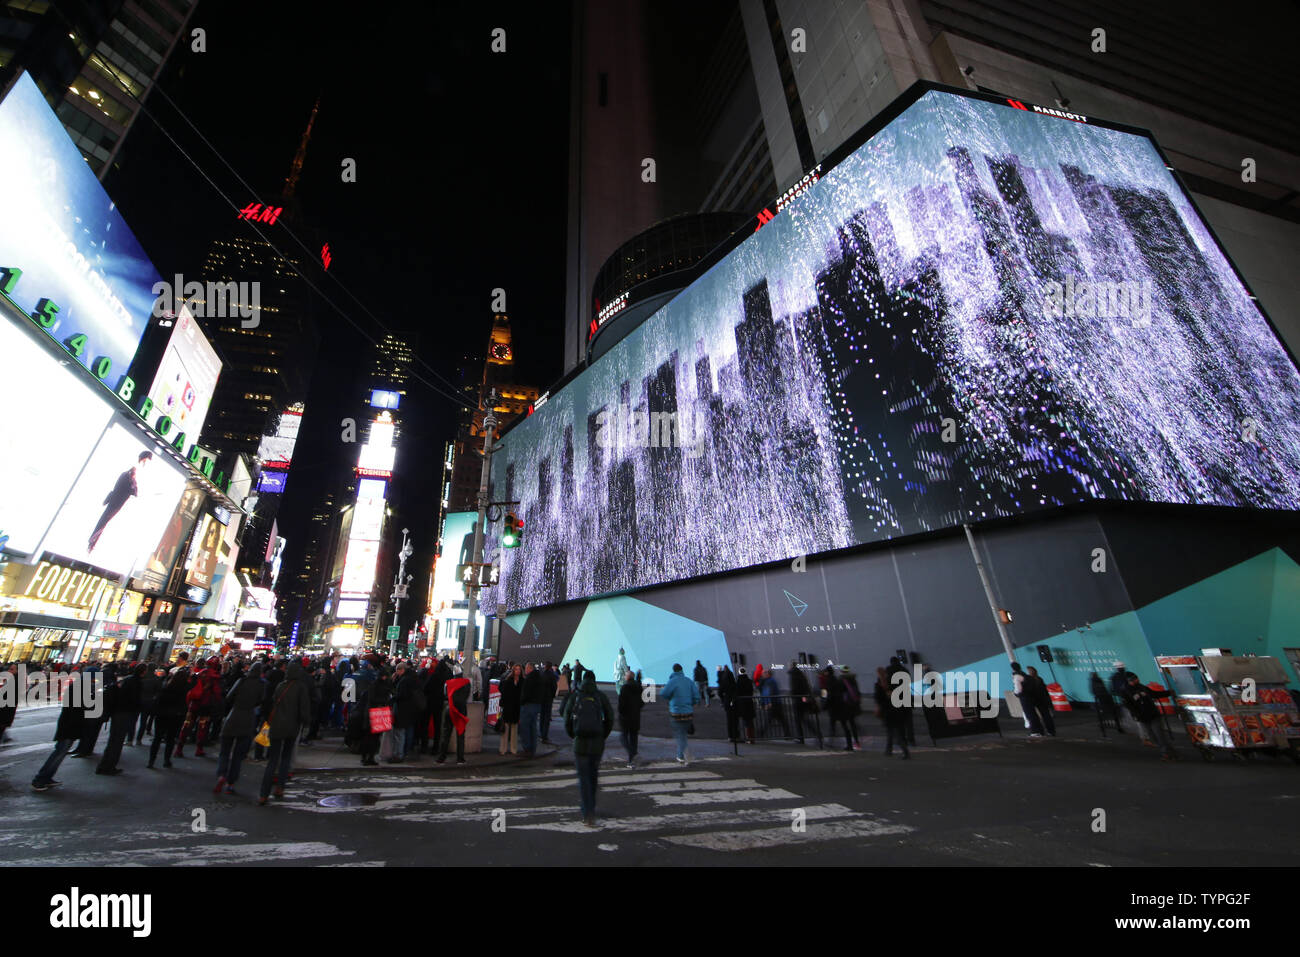 Led Screen Time Square High Resolution Stock Photography and Images - Alamy